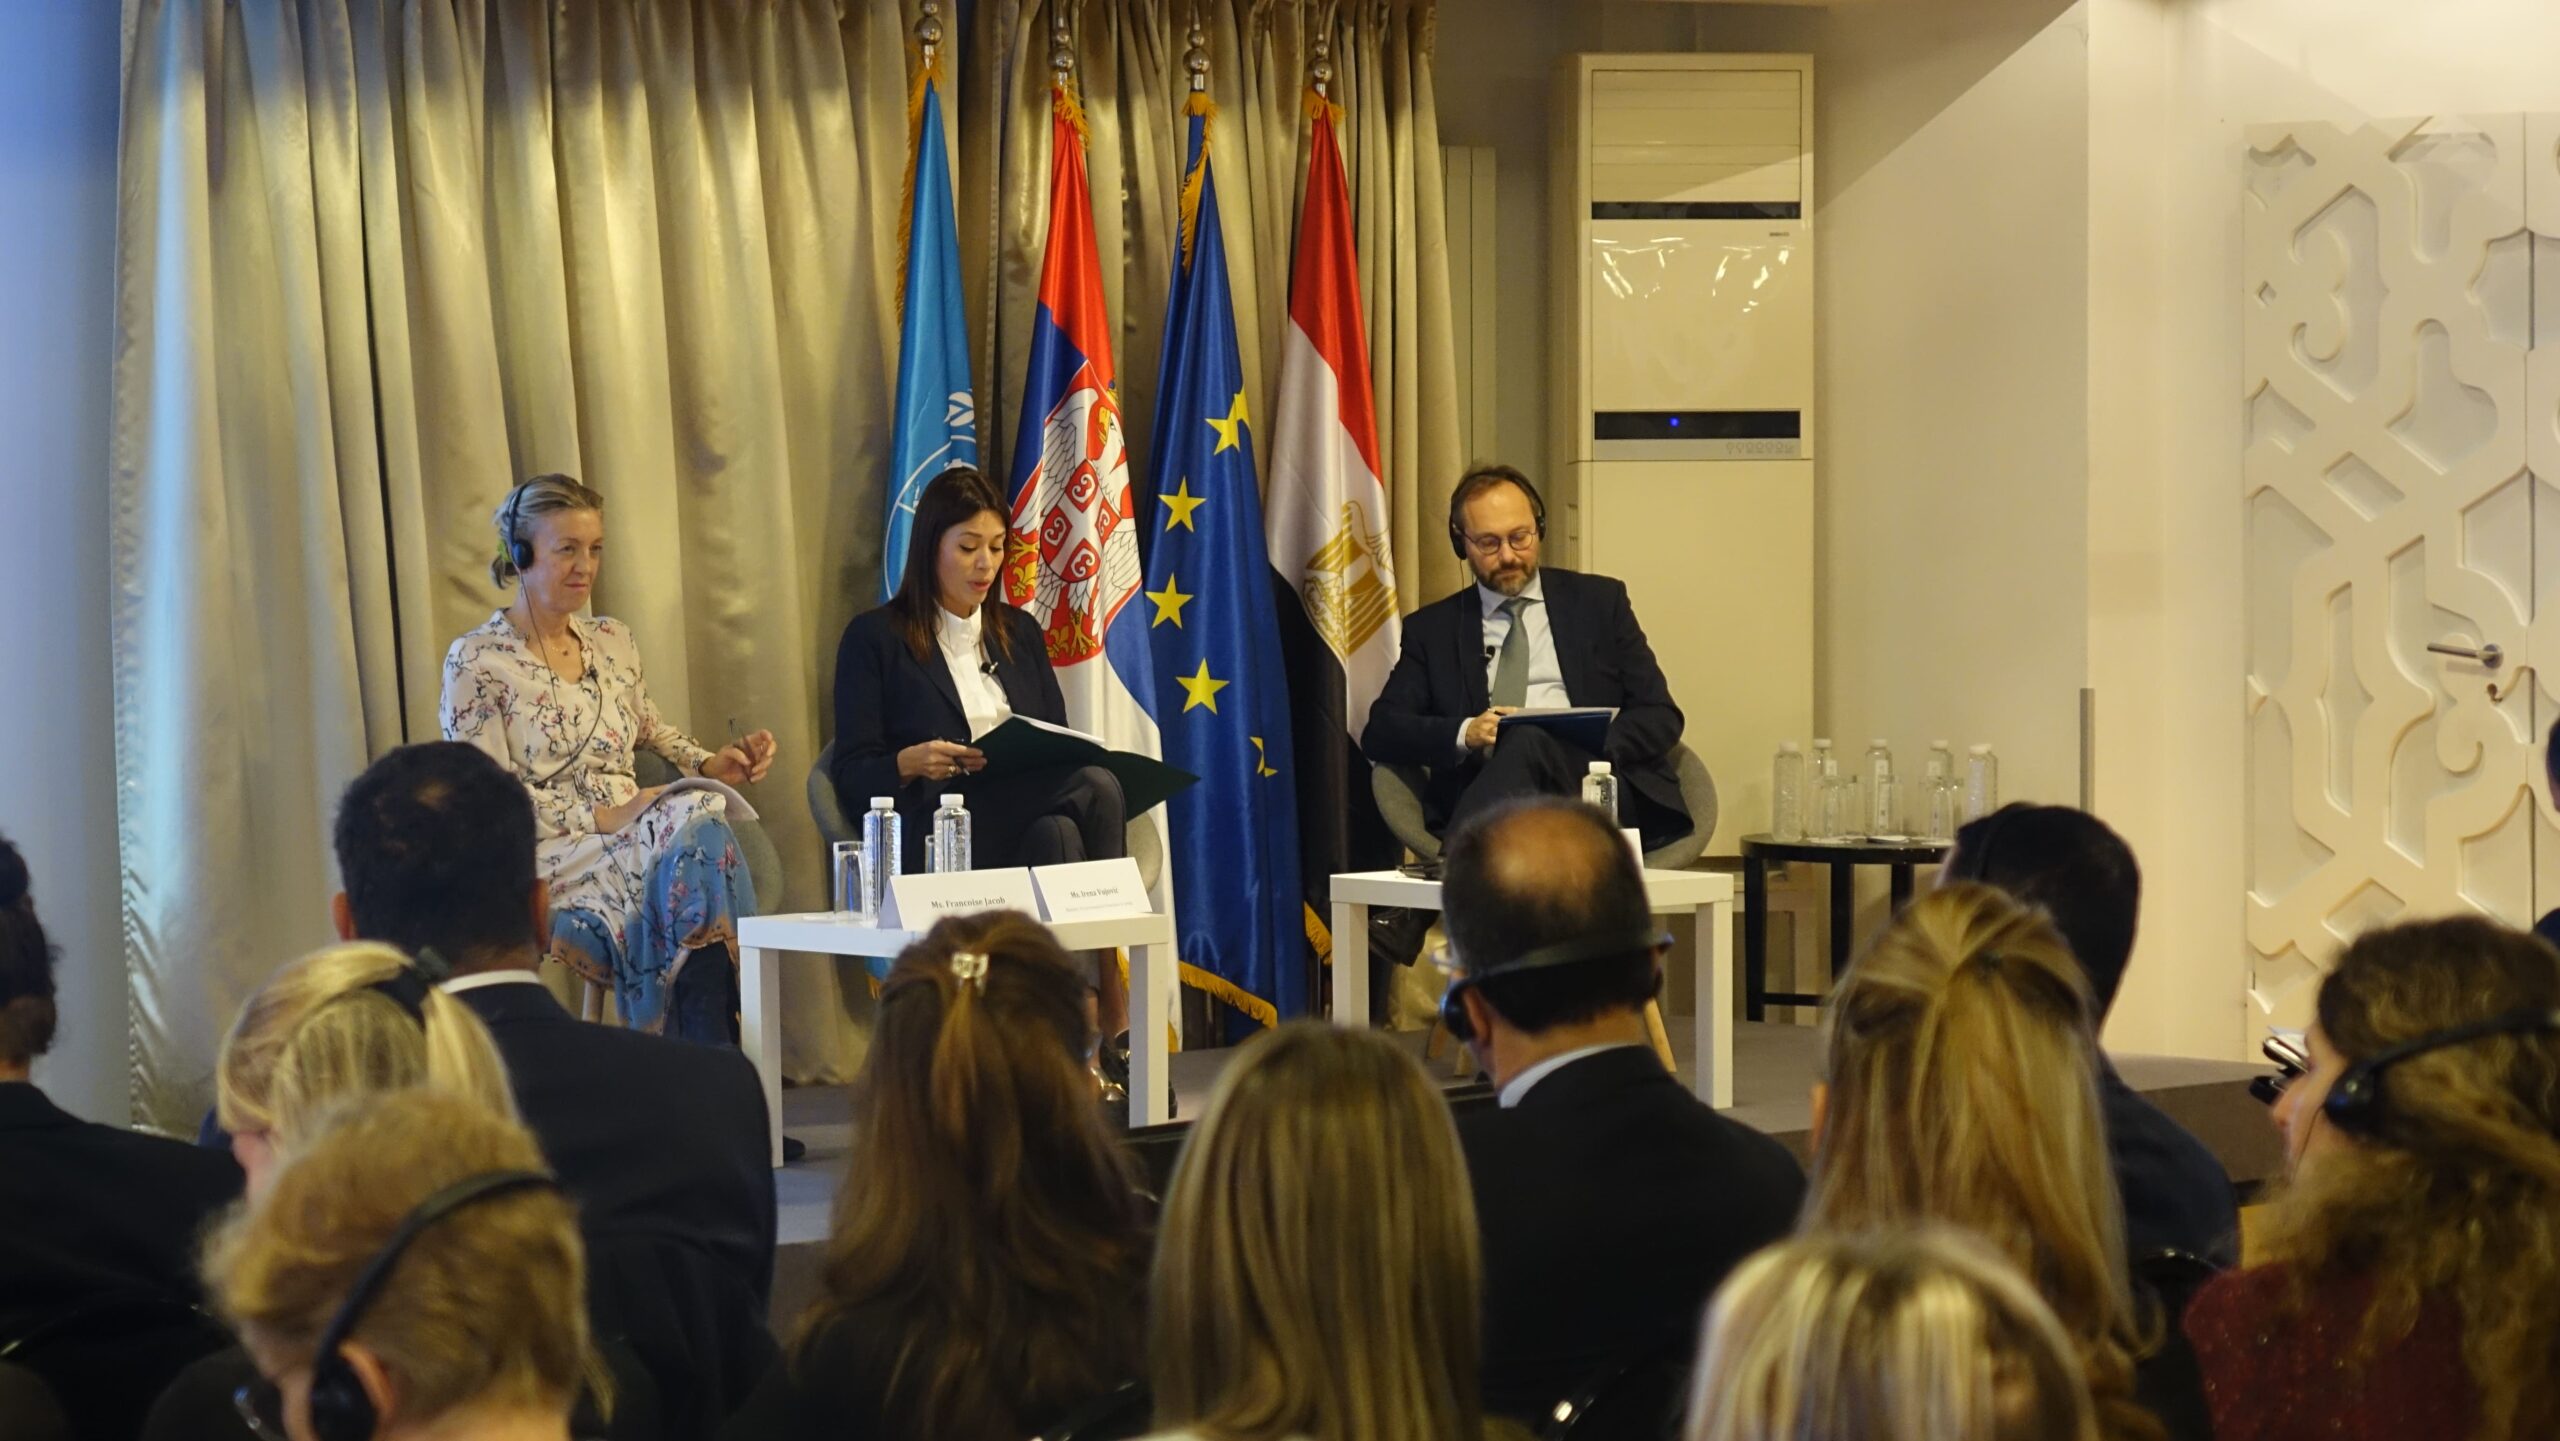 Dialogue on Climate Change: Climate Smart Partnerships in the Decade of Action was held